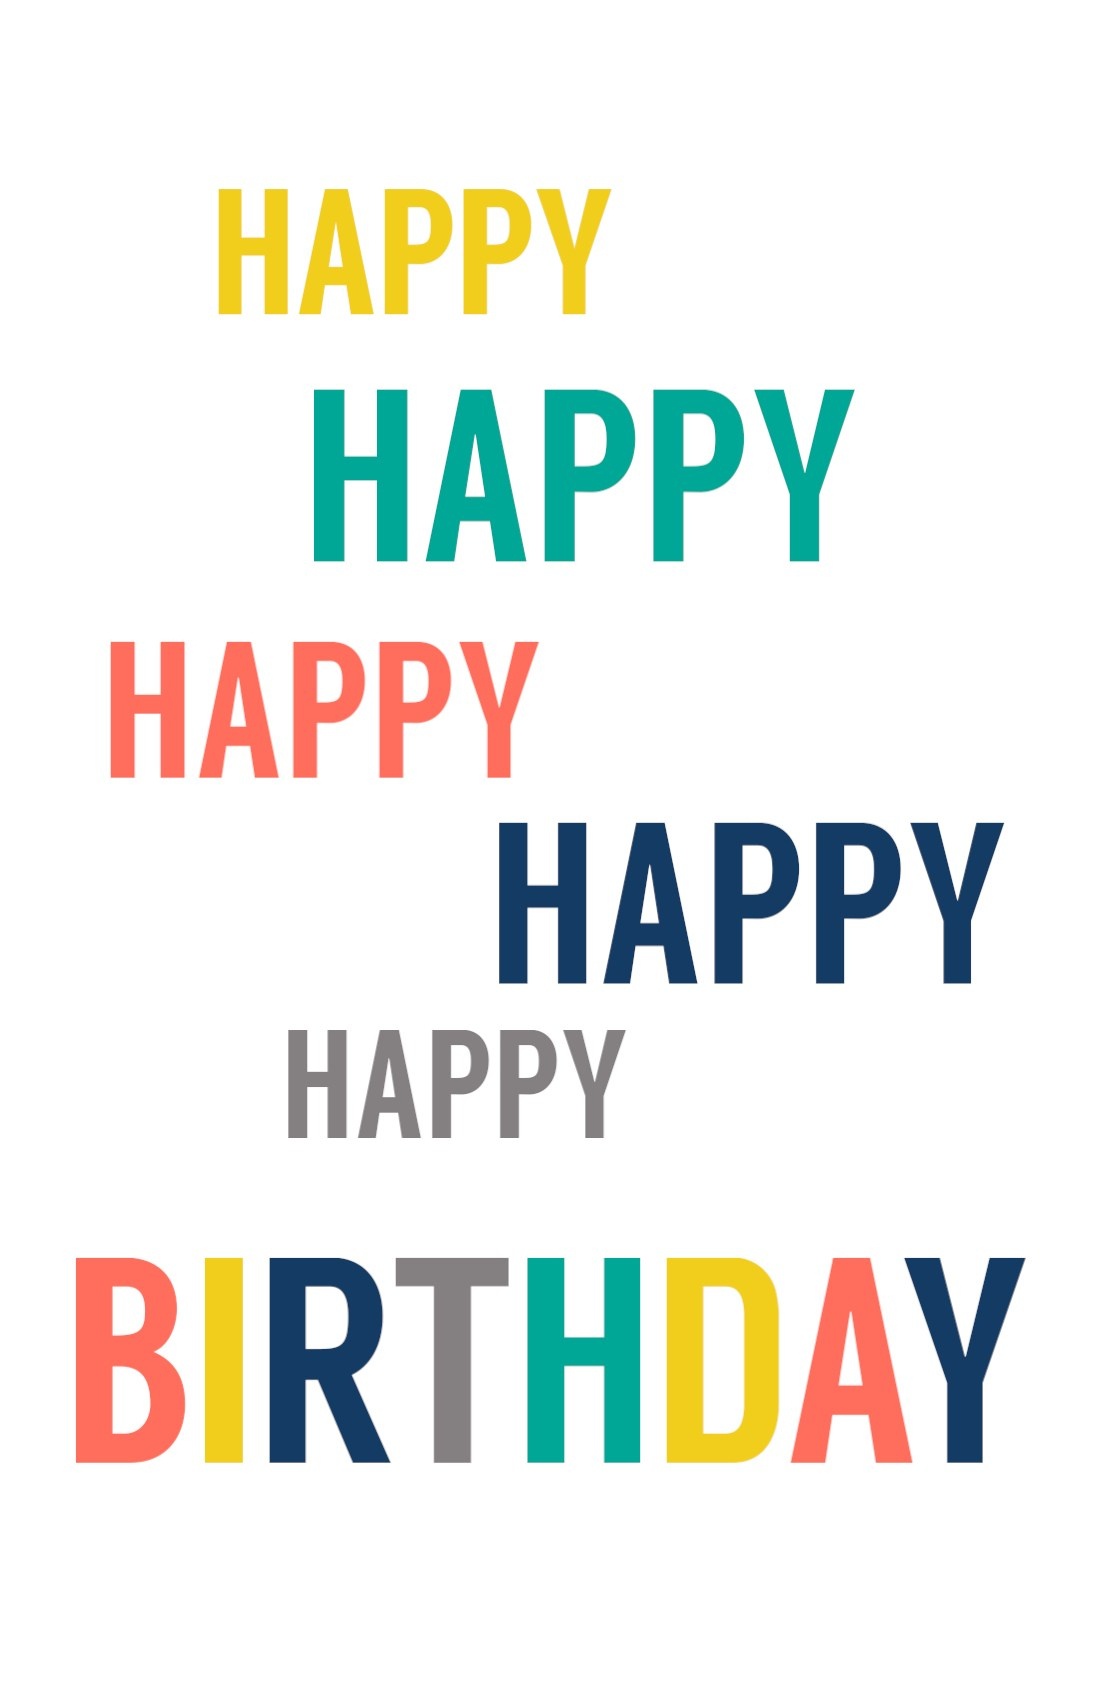 Free Printable Birthday Cards - Paper Trail Design - Free Printable Birthday Cards For Wife